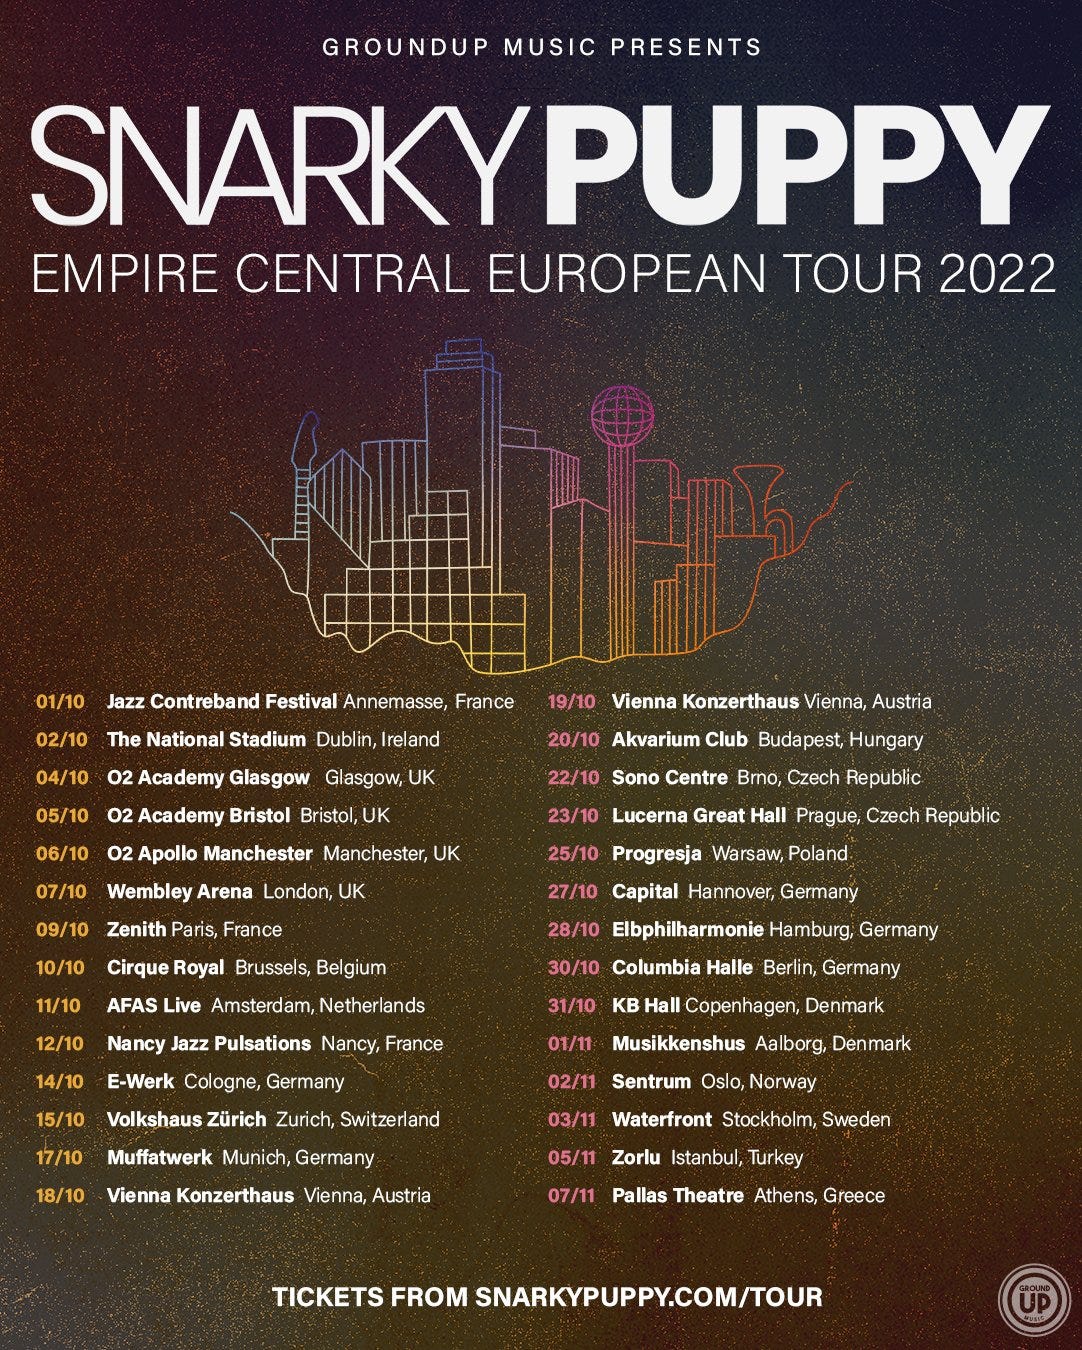 Snarky Puppy (@RealSnarkyPuppy) / Twitter